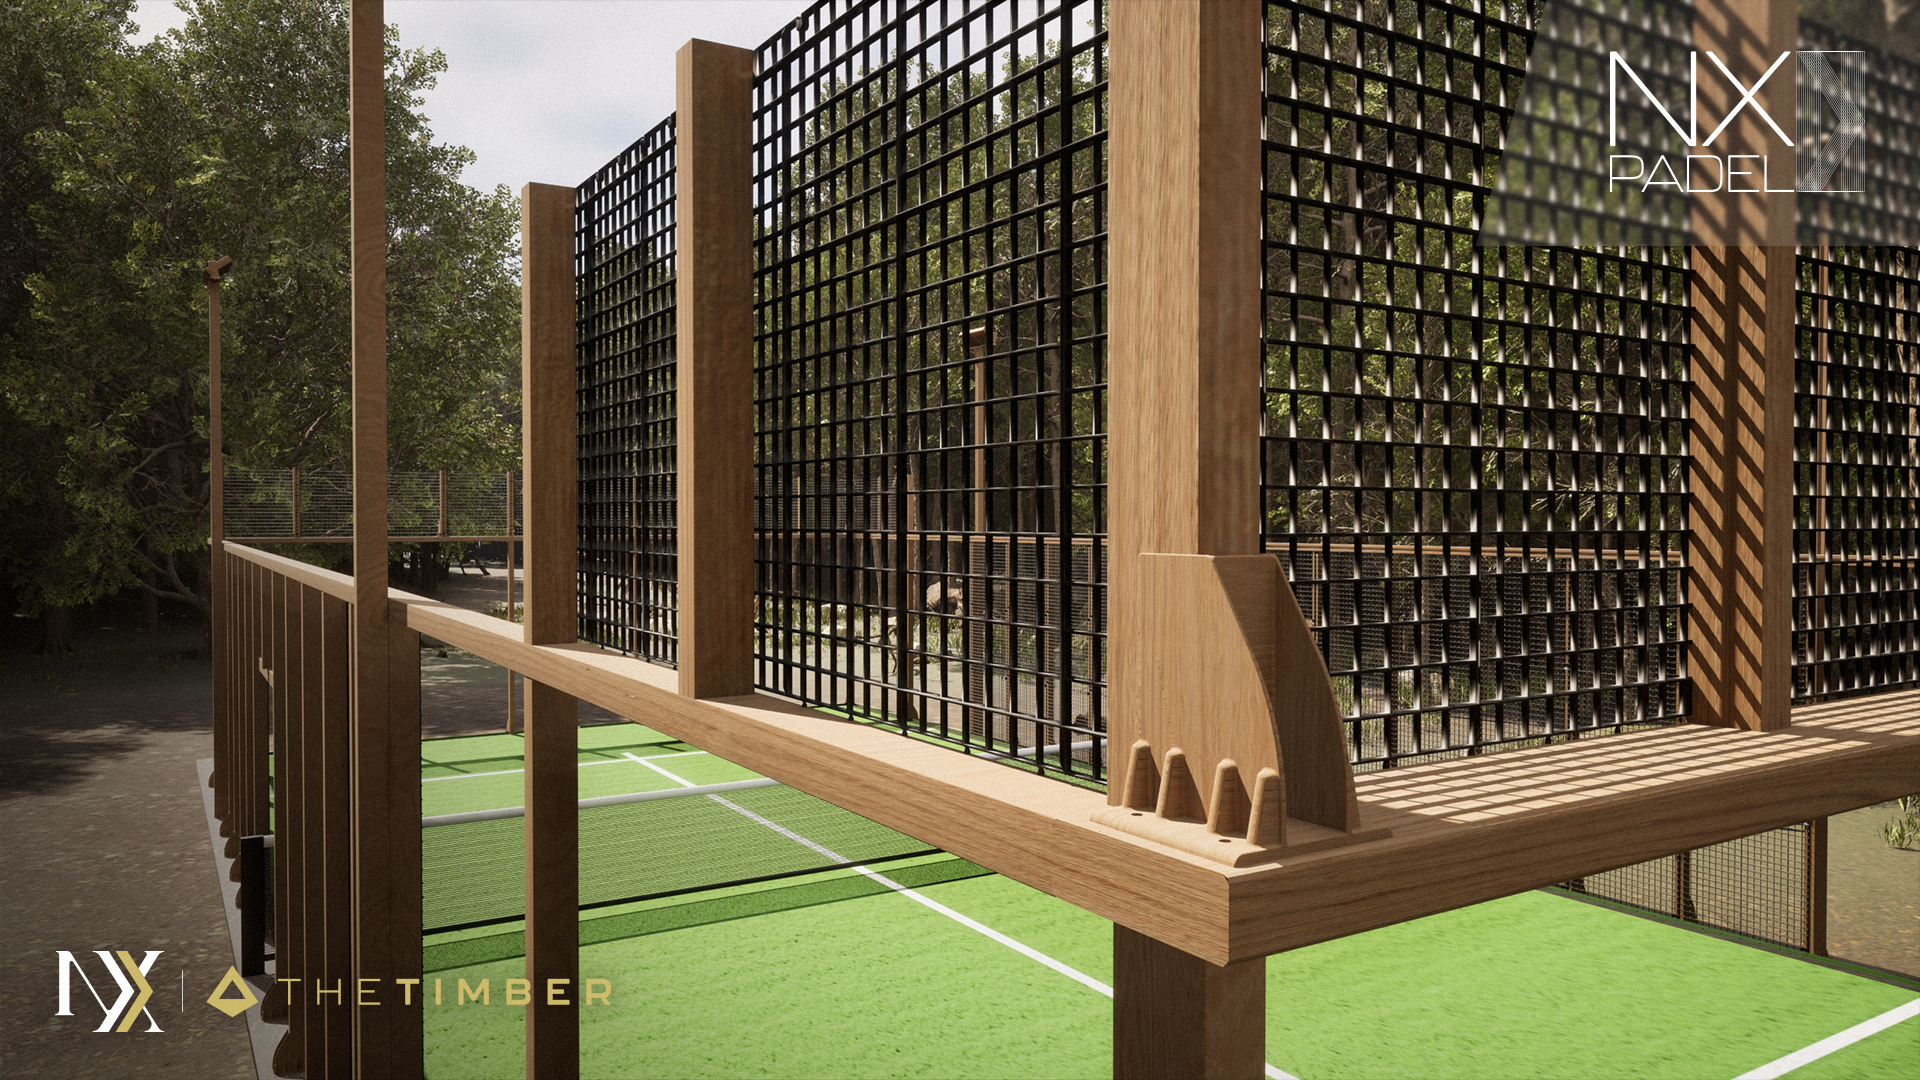 The Timber NXPADEL